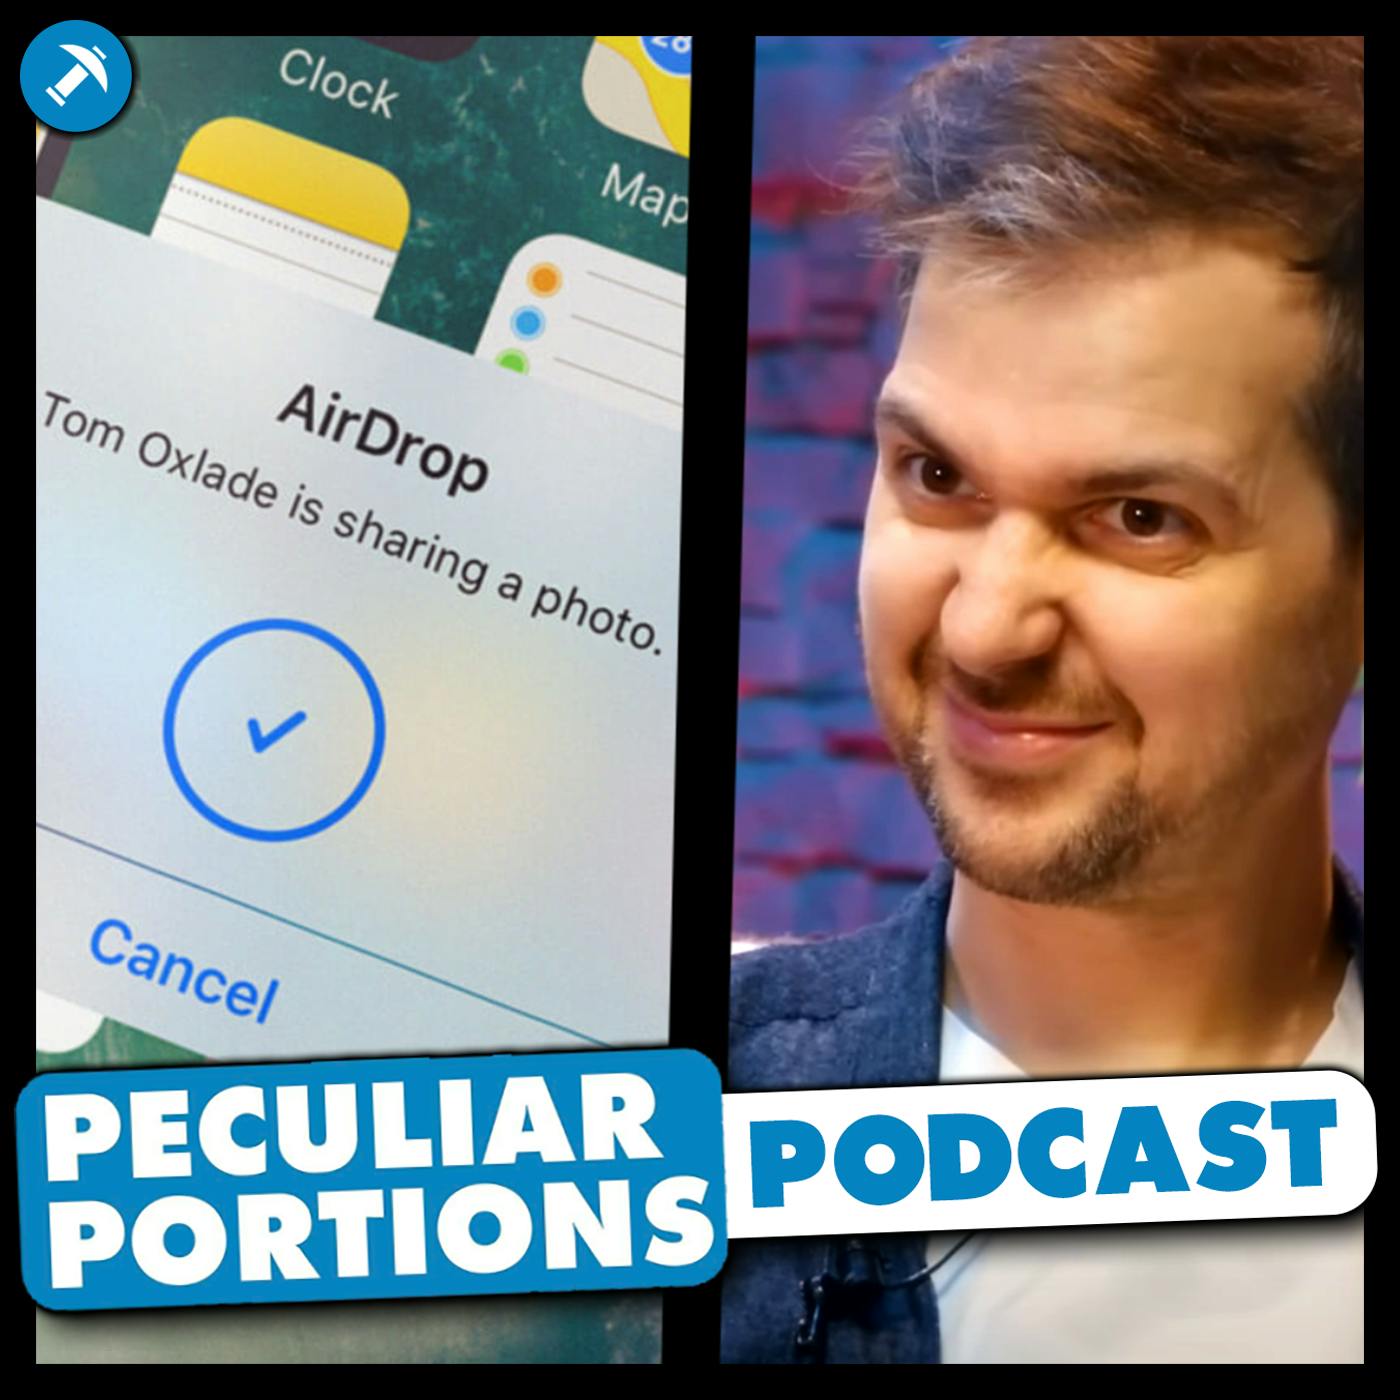 Pilot catches nude Airdroppers - Peculiar Portions Podcast #71